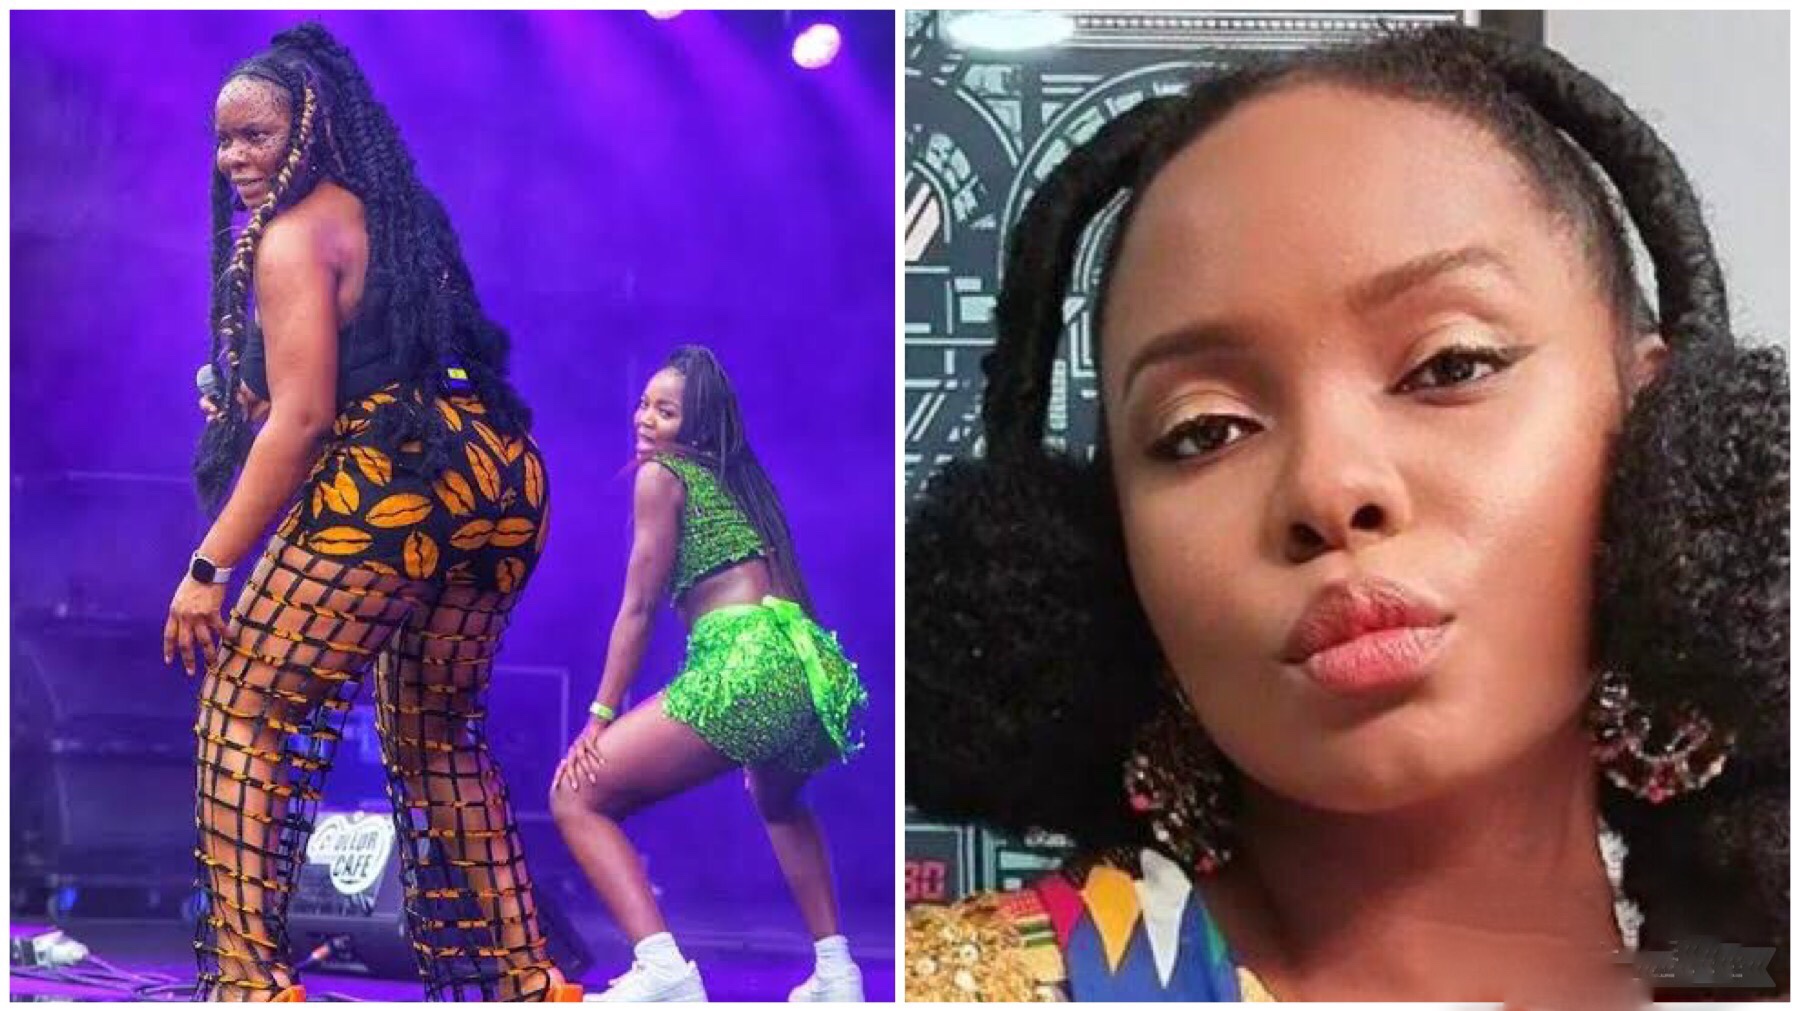 “I felt musically unhinged” – Yemi Alade, says as she performs without makeup (video)